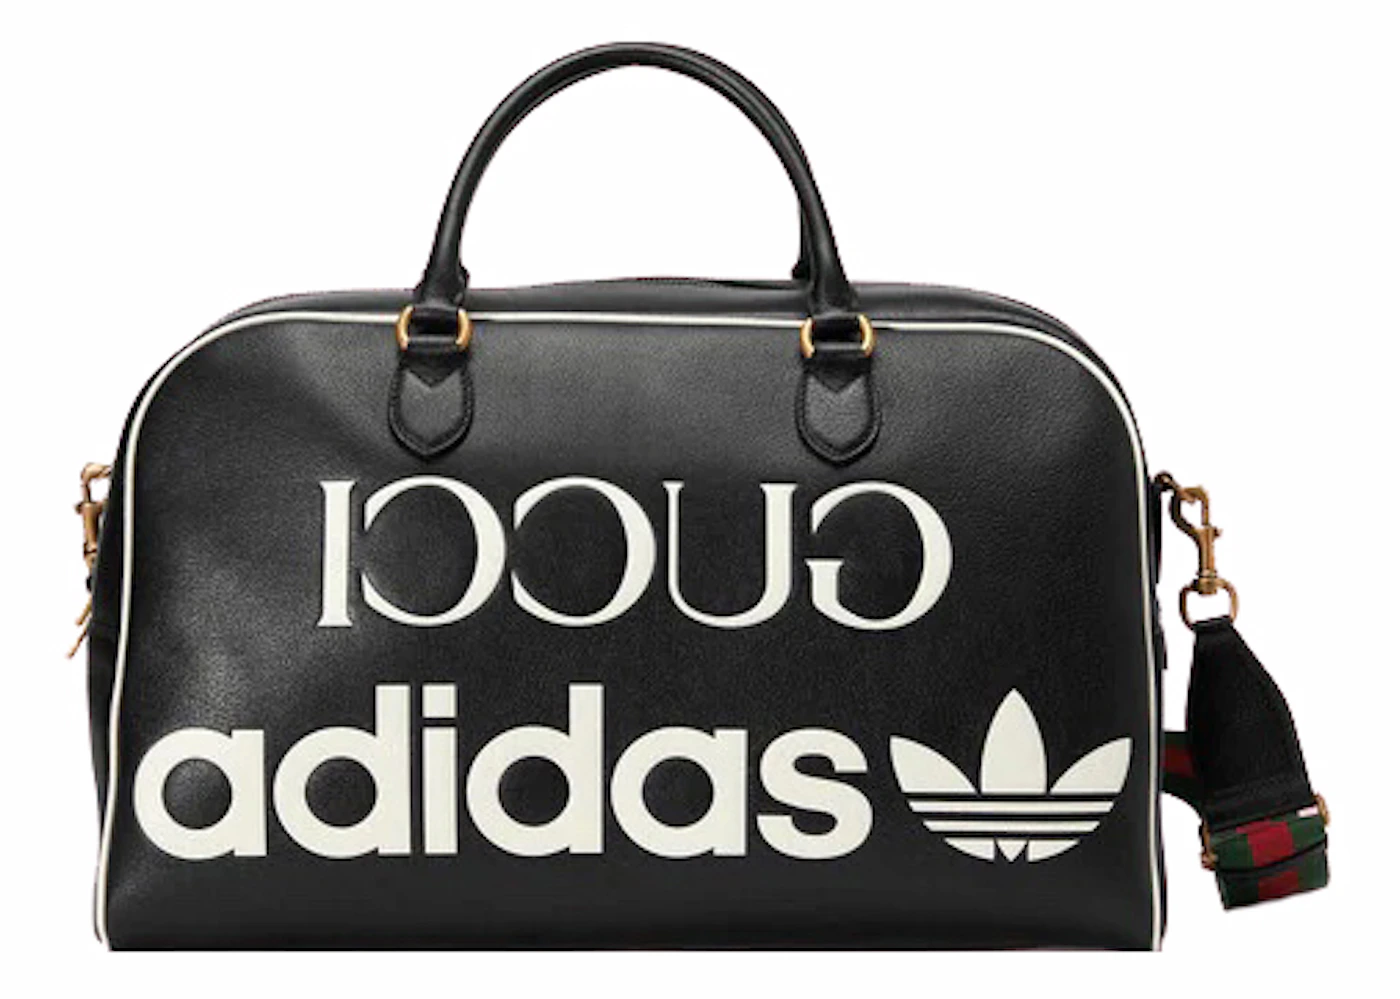 Gucci x adidas Large Leather Bag US in Gold-tone Black with Duffle 